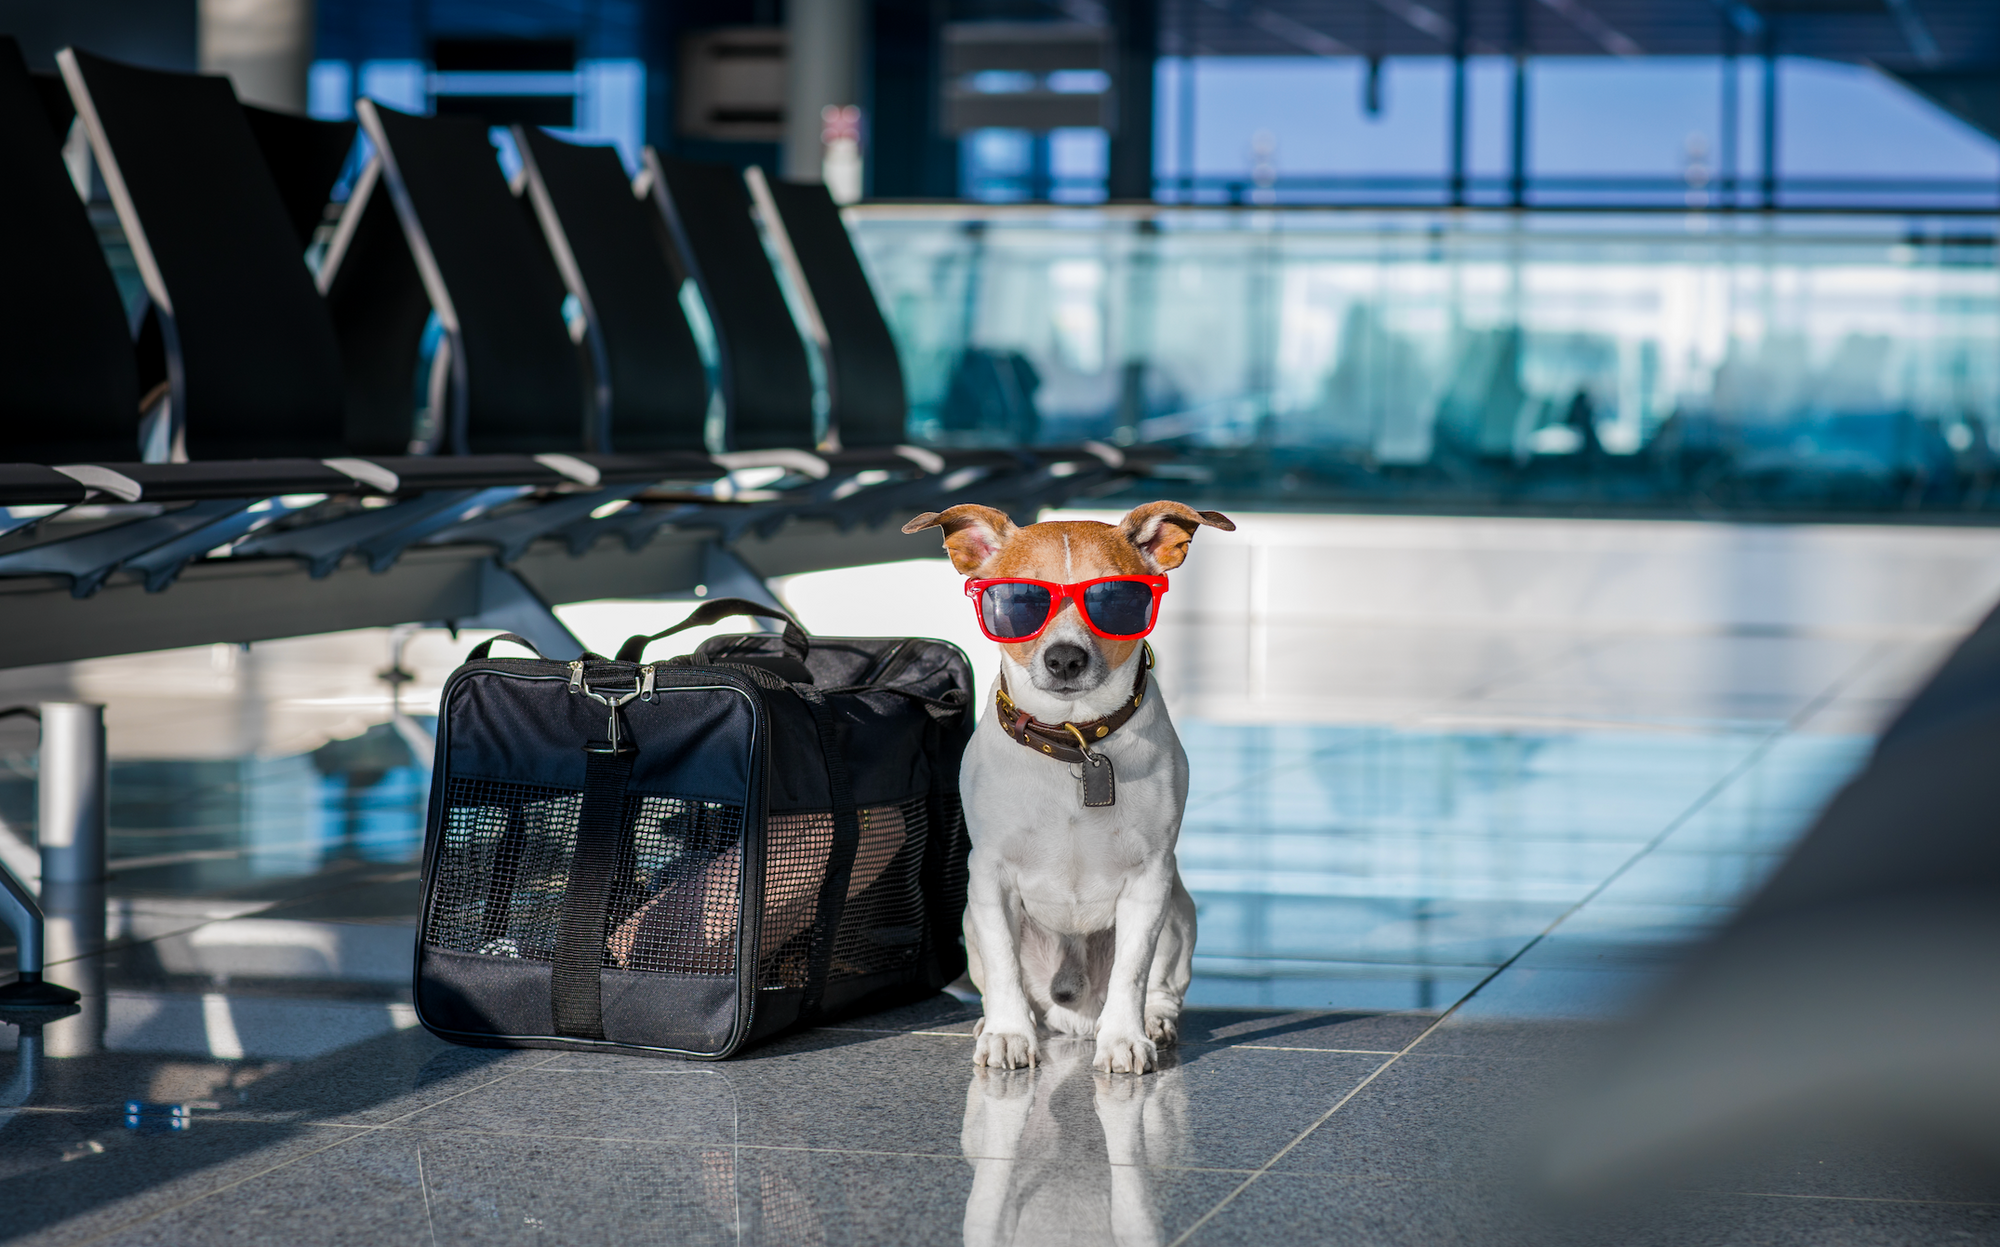 A dog wearing sunglasses and a bag, standing outdoors.